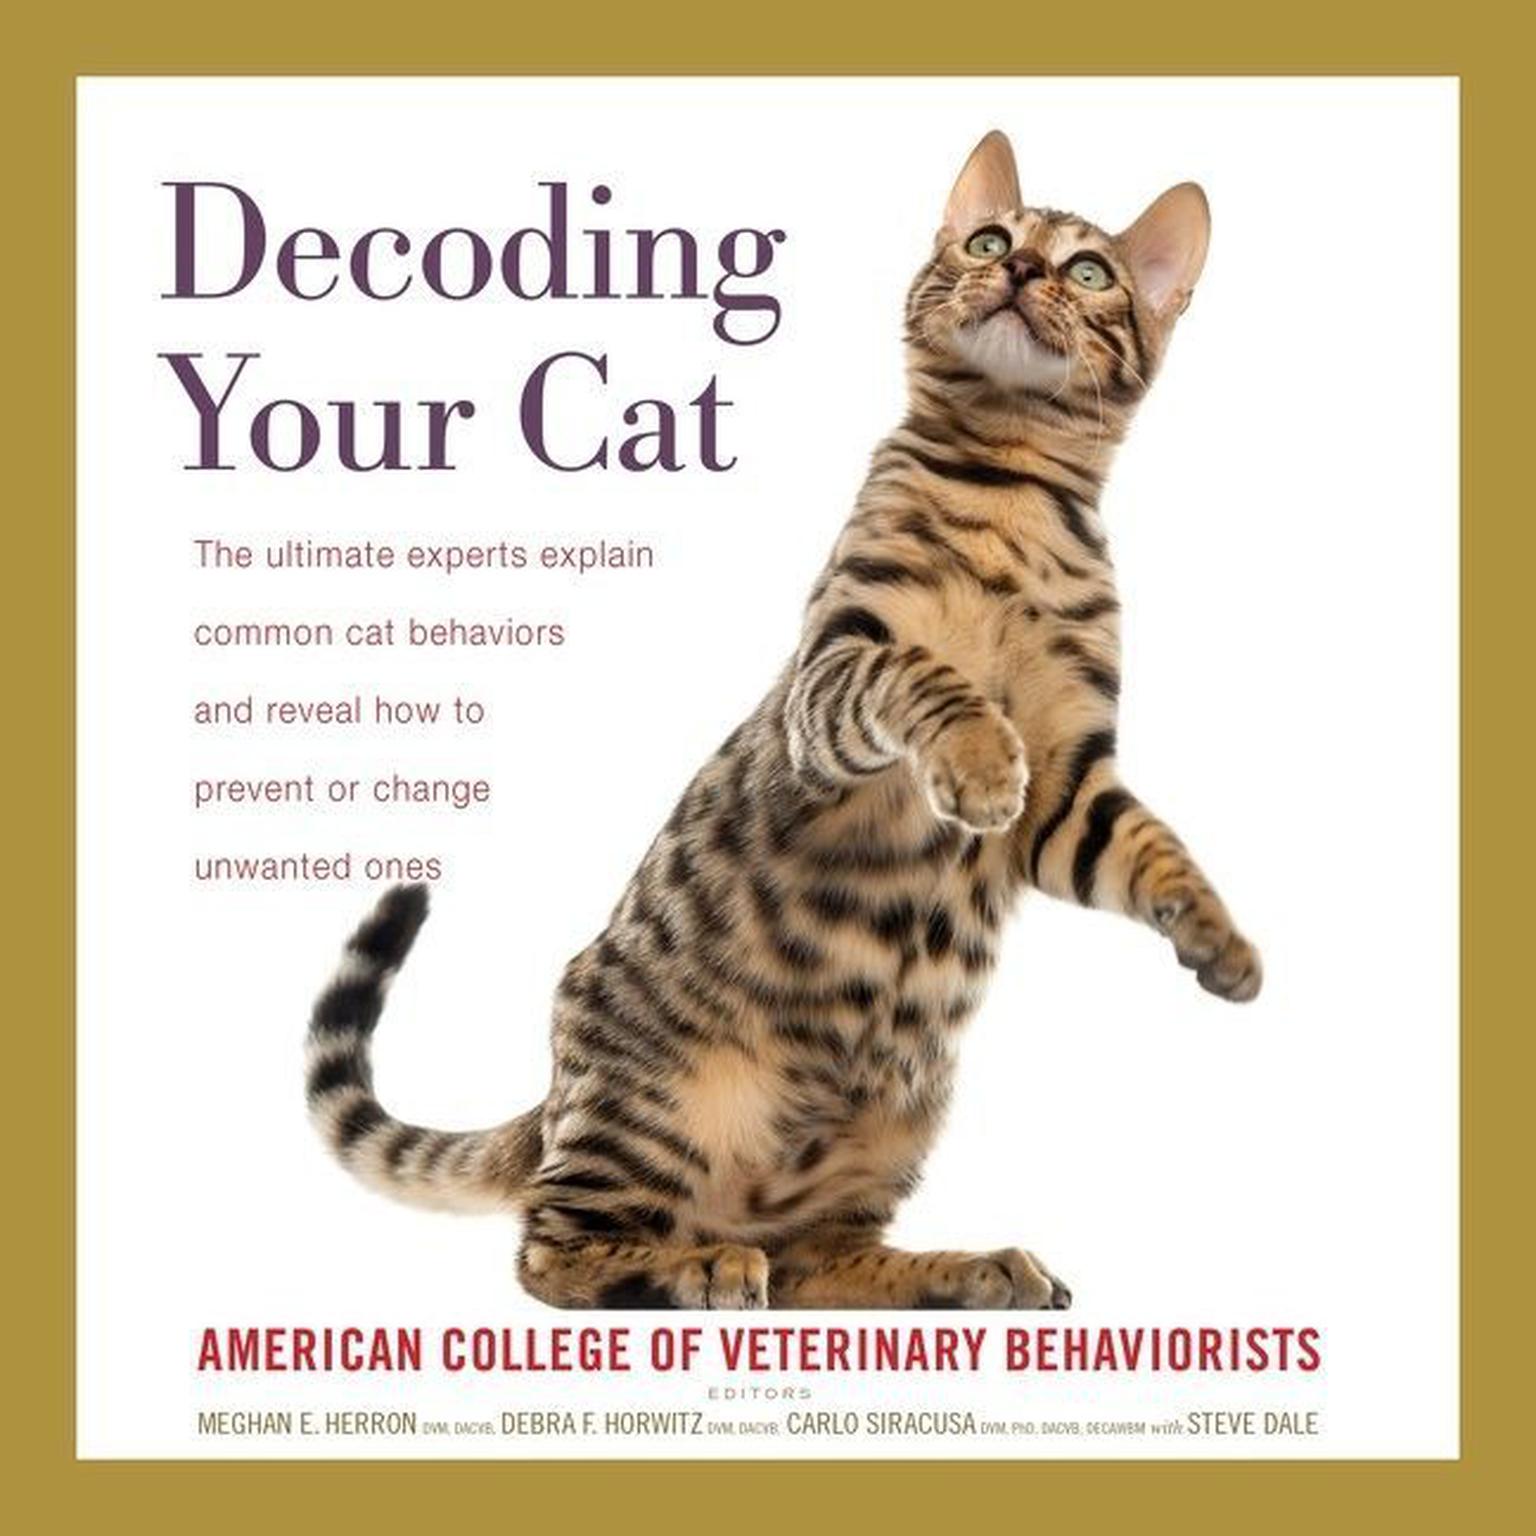 Decoding Your Cat: The Ultimate Experts Explain Common Cat Behaviors and Reveal How to Prevent or Change Unwanted Ones Audiobook, by American College of Veterinary Behaviorists